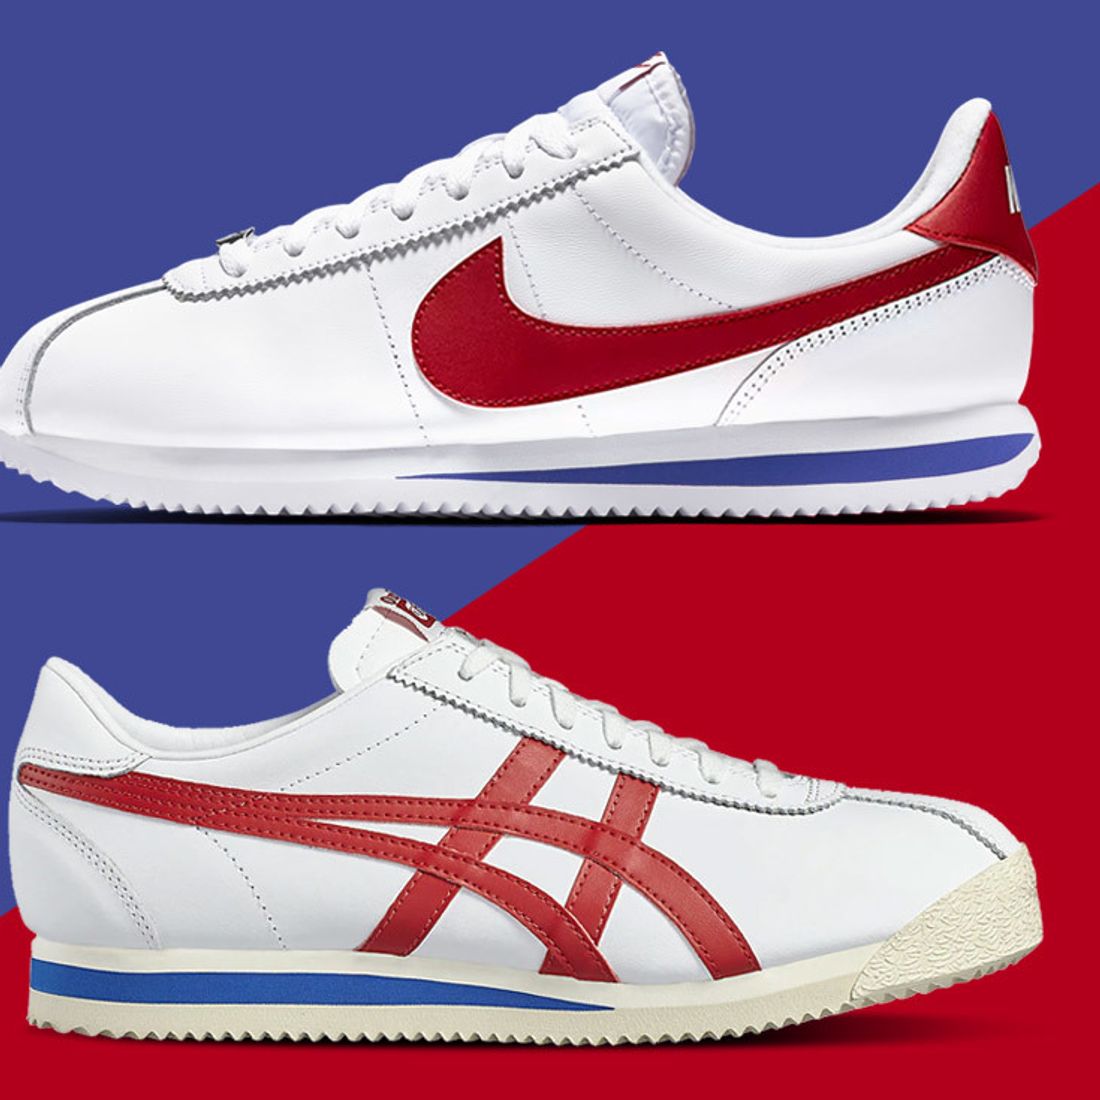 Vagrant escort Brandy Which Came First: Nike's Cortez or Onitsuka Tiger's Corsair? - Sneaker  Freaker